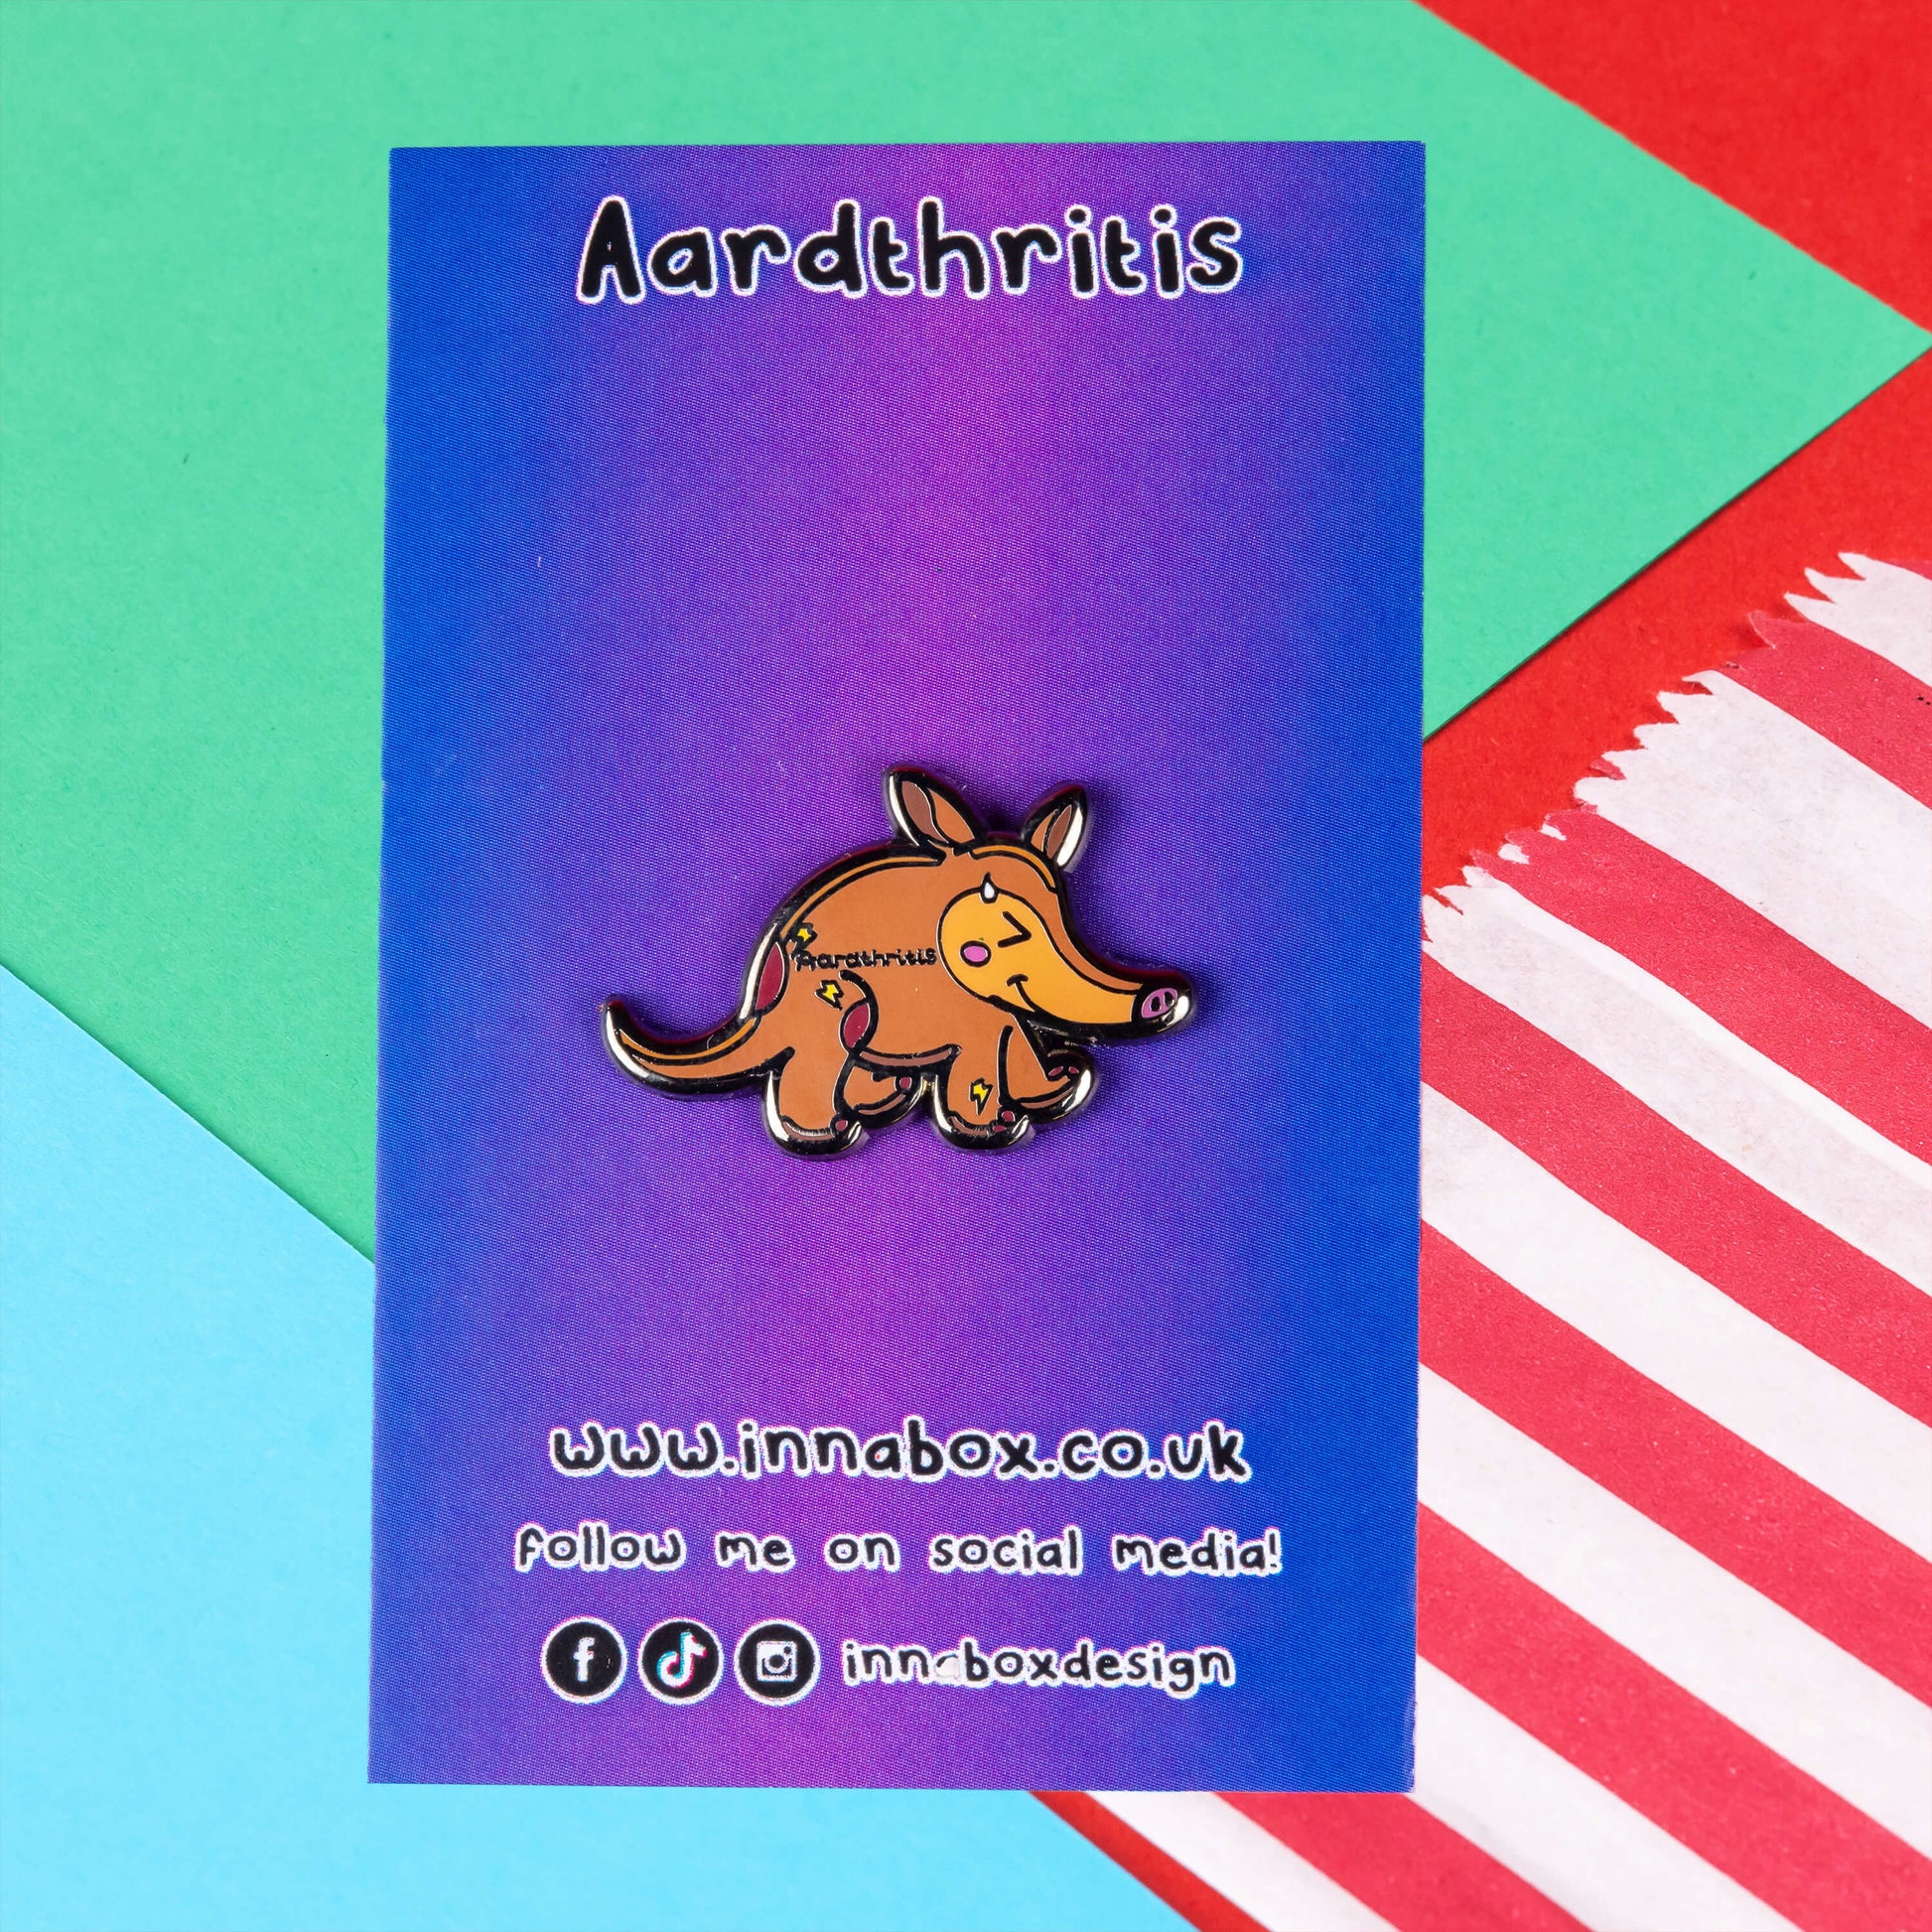 The Aardthritis Aardvark Enamel Pin - Arthritis on purple and blue gradient backing card with black text. The smiling sweating brown aardvark with pink cheeks and lightning bolts scattered across its body with black text reading 'aardthritis'. The hand drawn design is raising awareness for arthritis, Osteoarthritis and Rheumatoid arthritis.